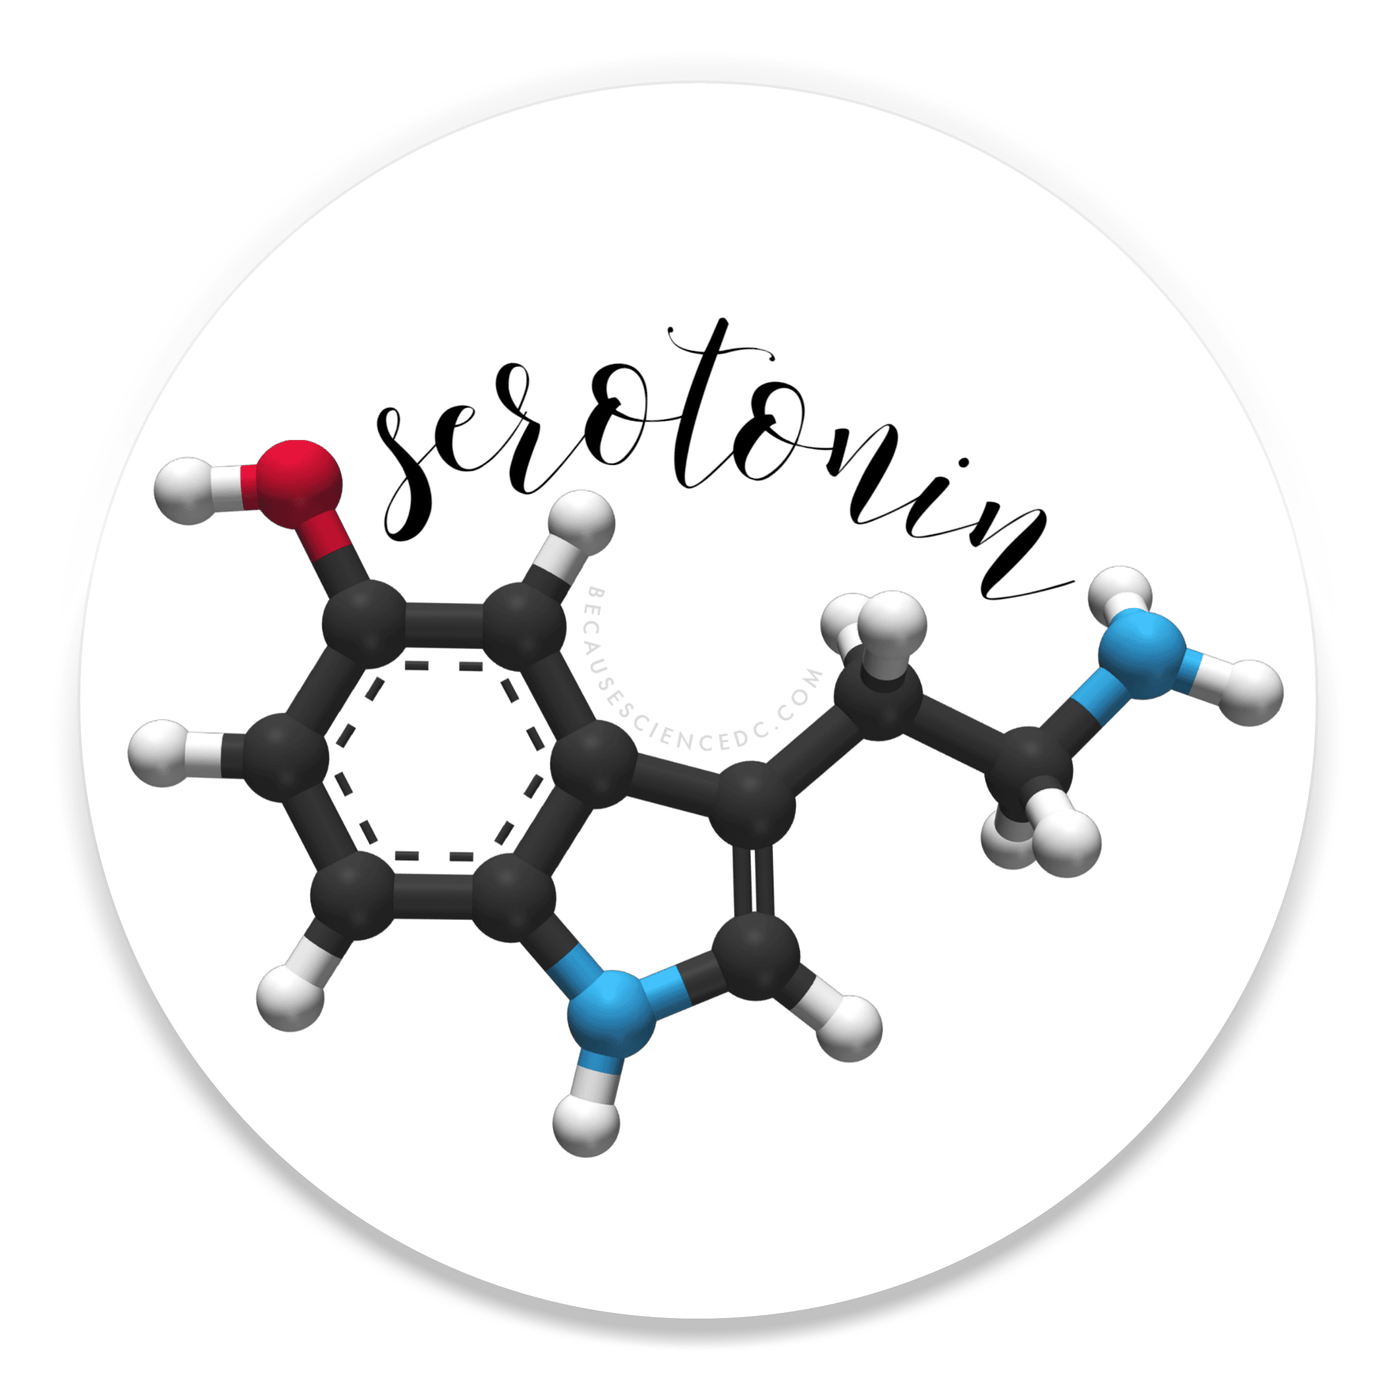 2.25 inch round colorful magnet with image of the molecular structure of serotonin